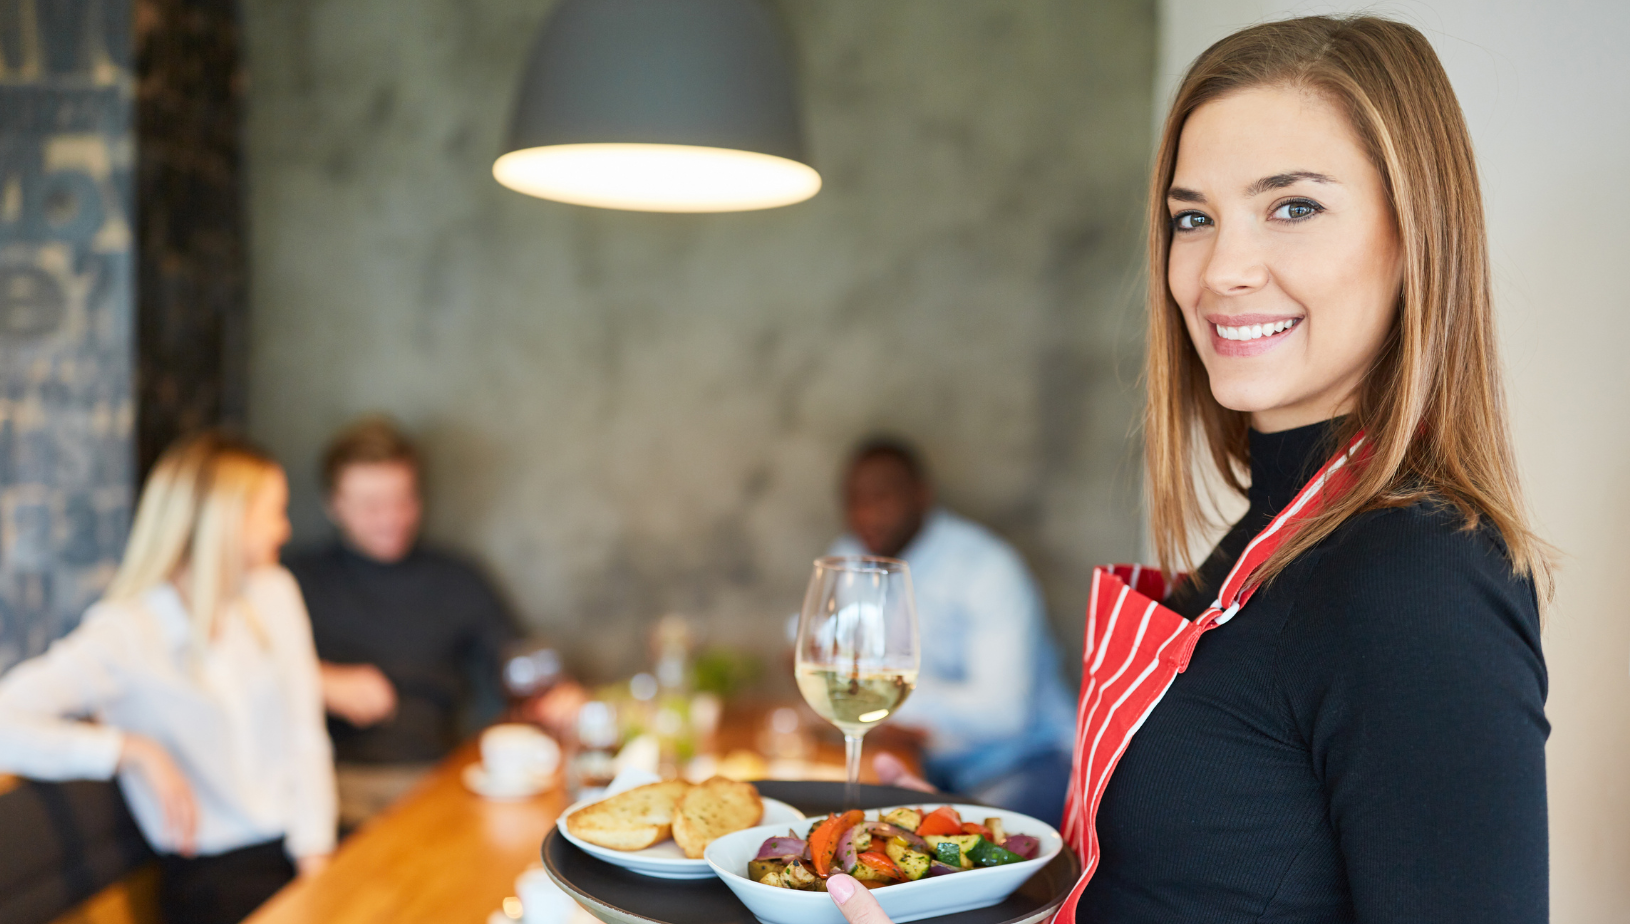 How to Prevent Harassment in Hospitality | Work Shield Blog